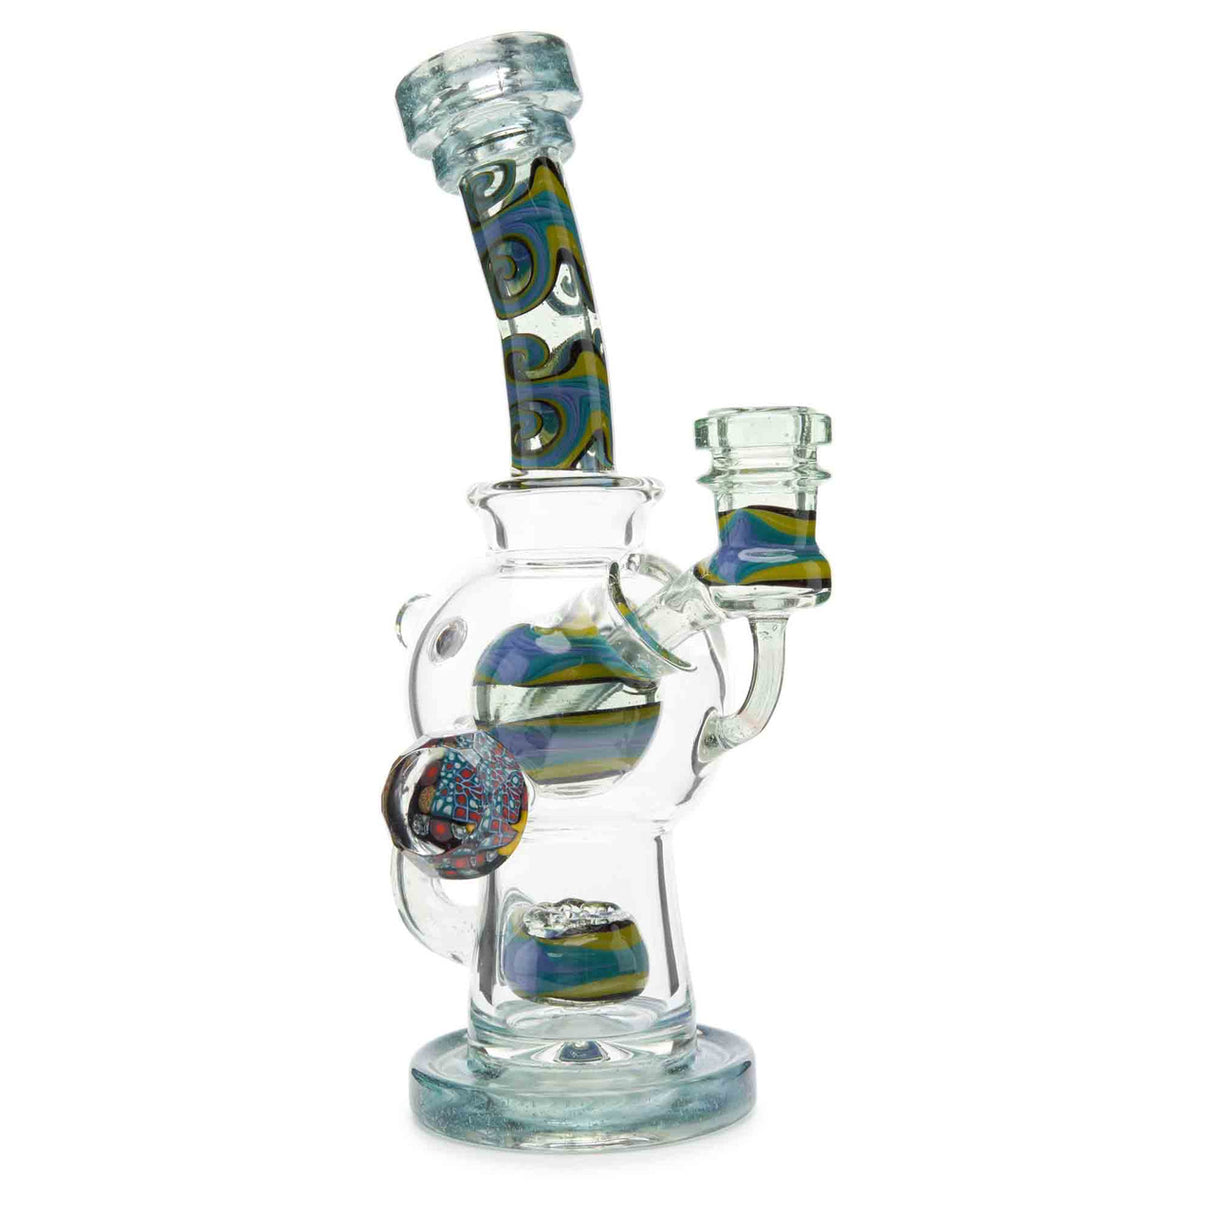 Dynamic Glass Ball Rig Worked heady dabs